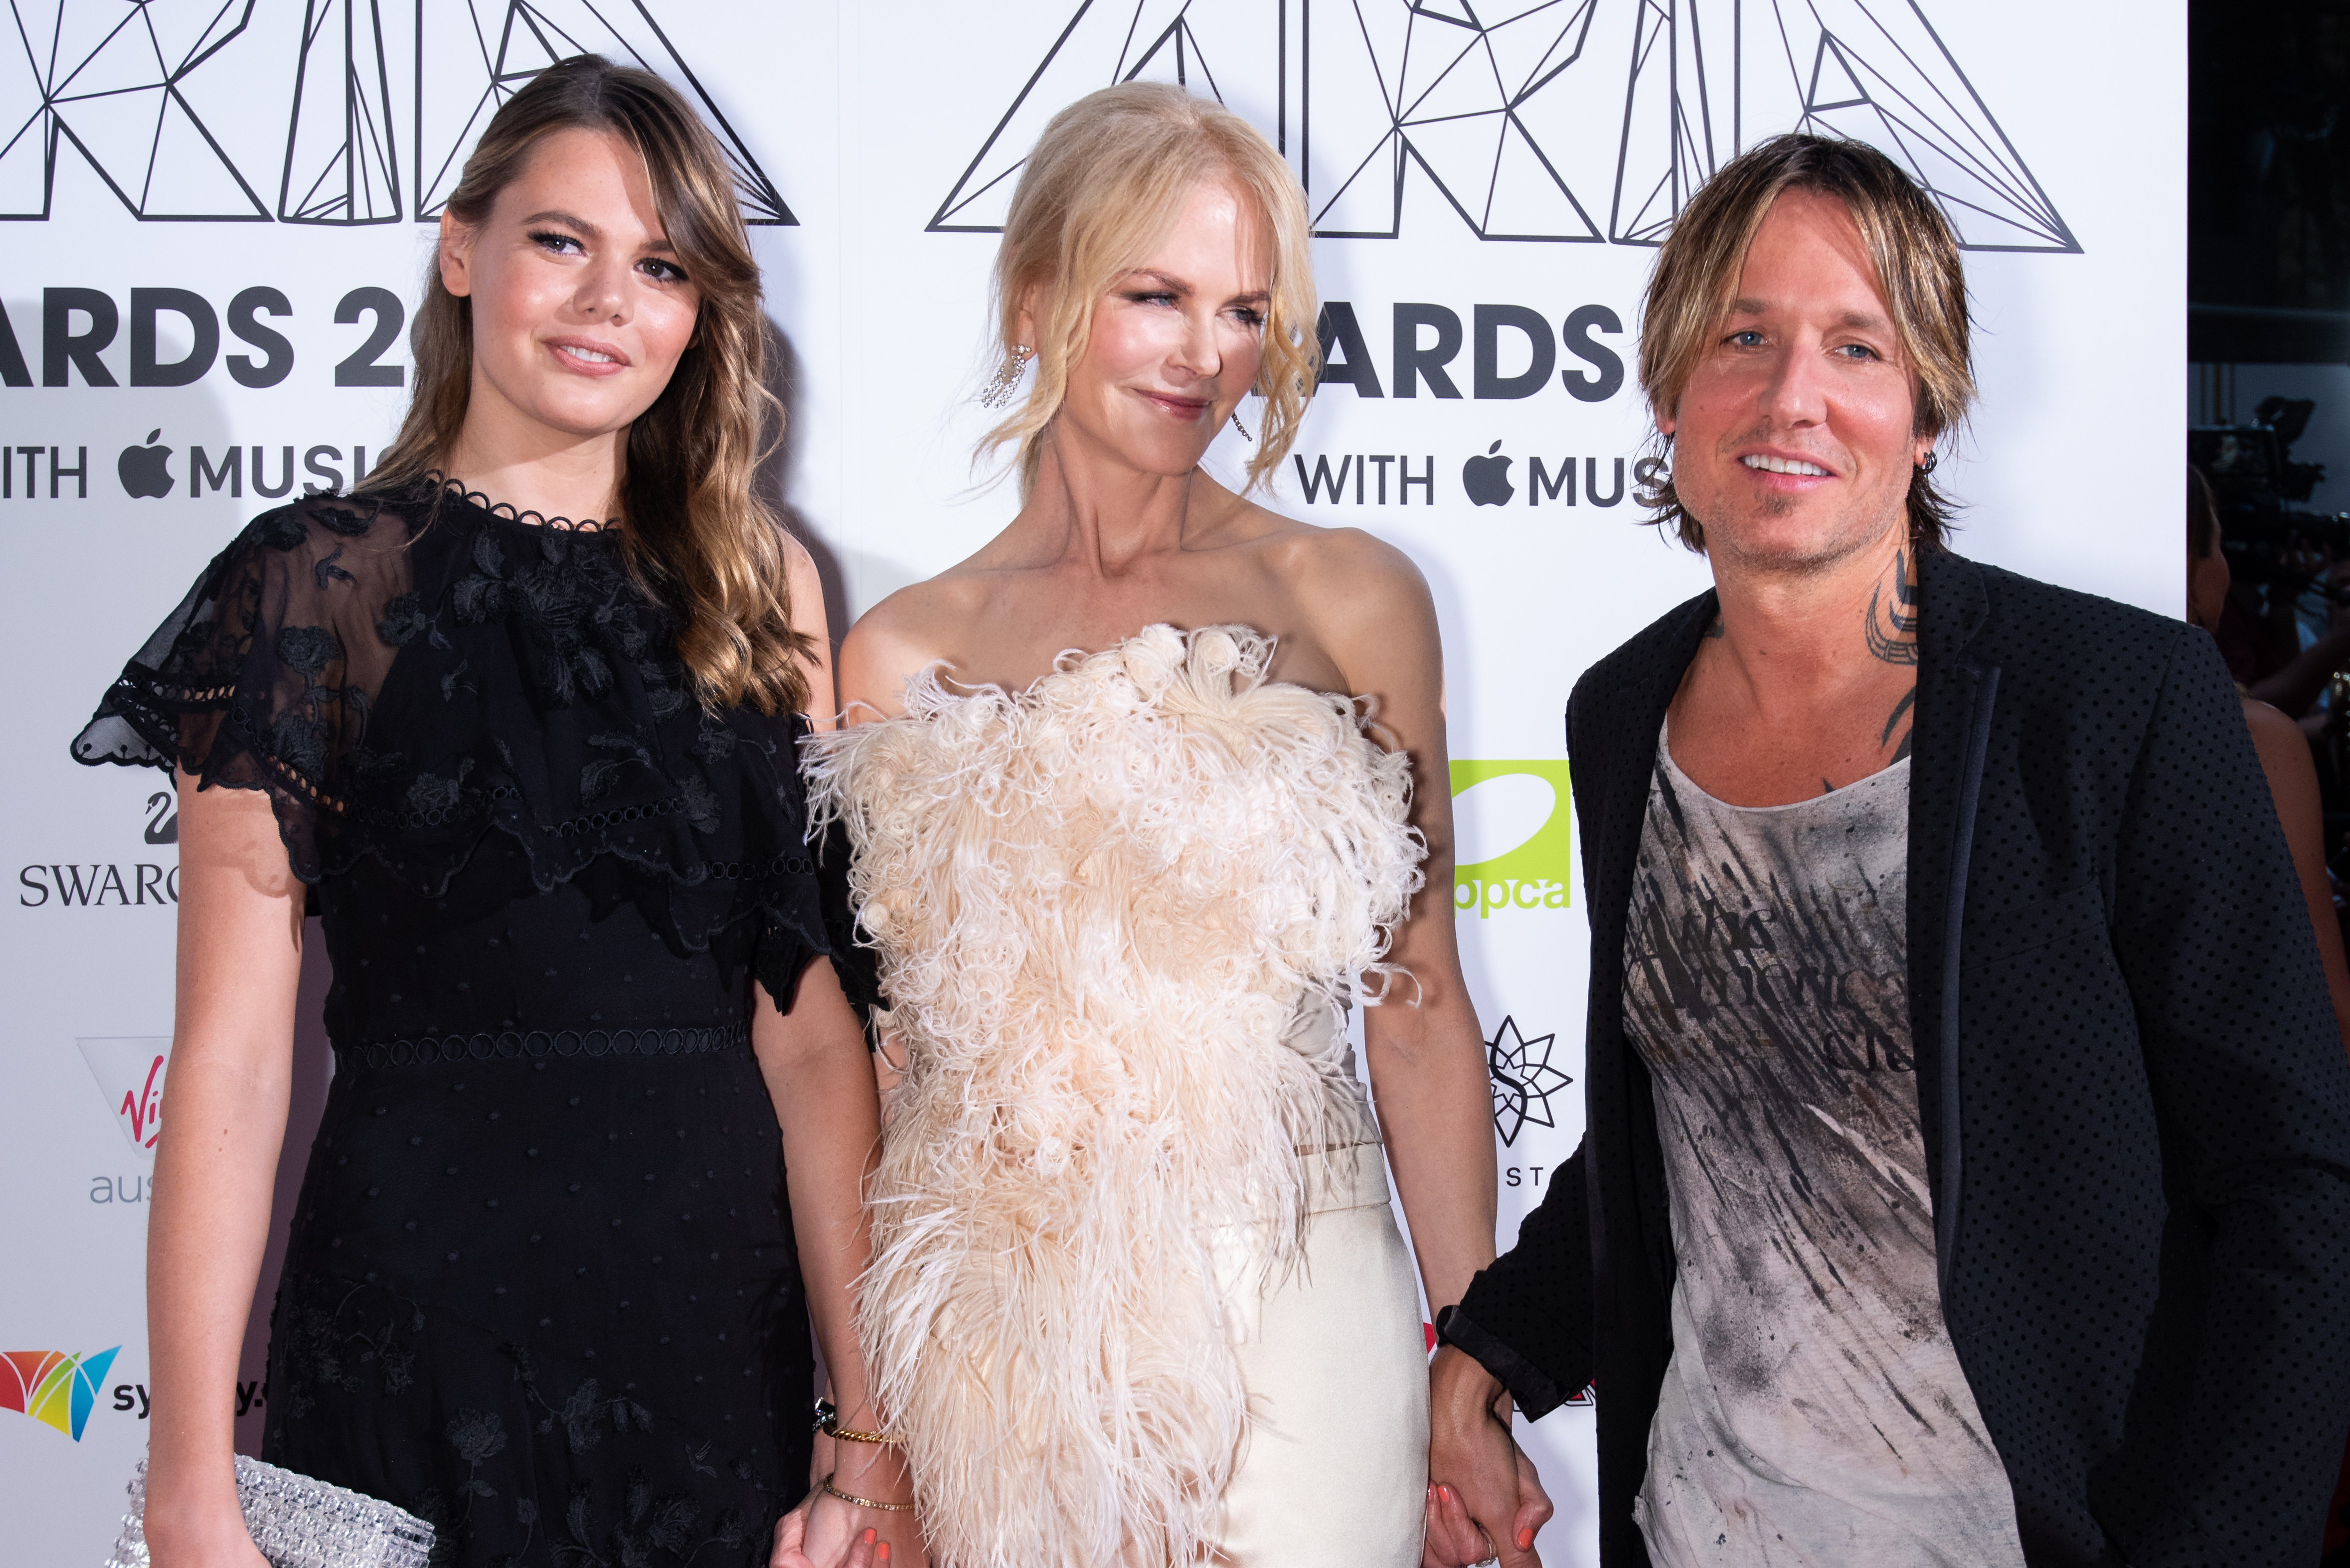 Lucia Hawley, Nicole Kidman and Keith Urban in Sydney, Australia on November 28, 2018 | Source: Getty Images